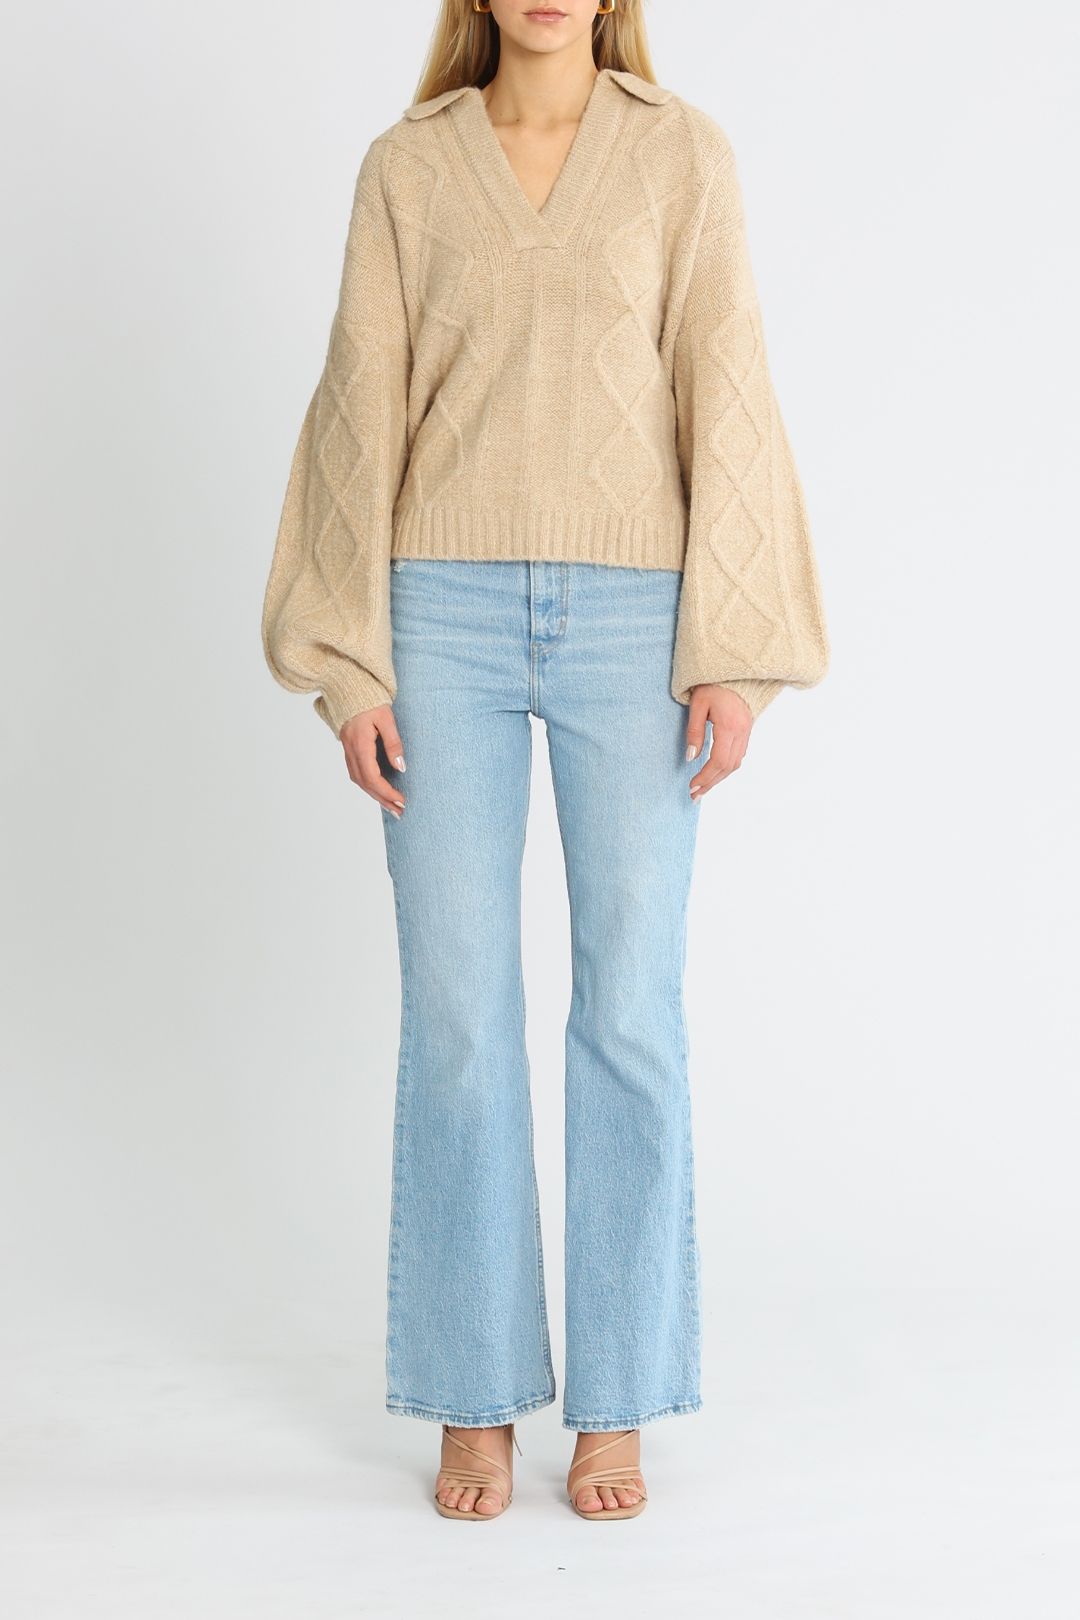 Staple The Label Norma Collared Jumper beige